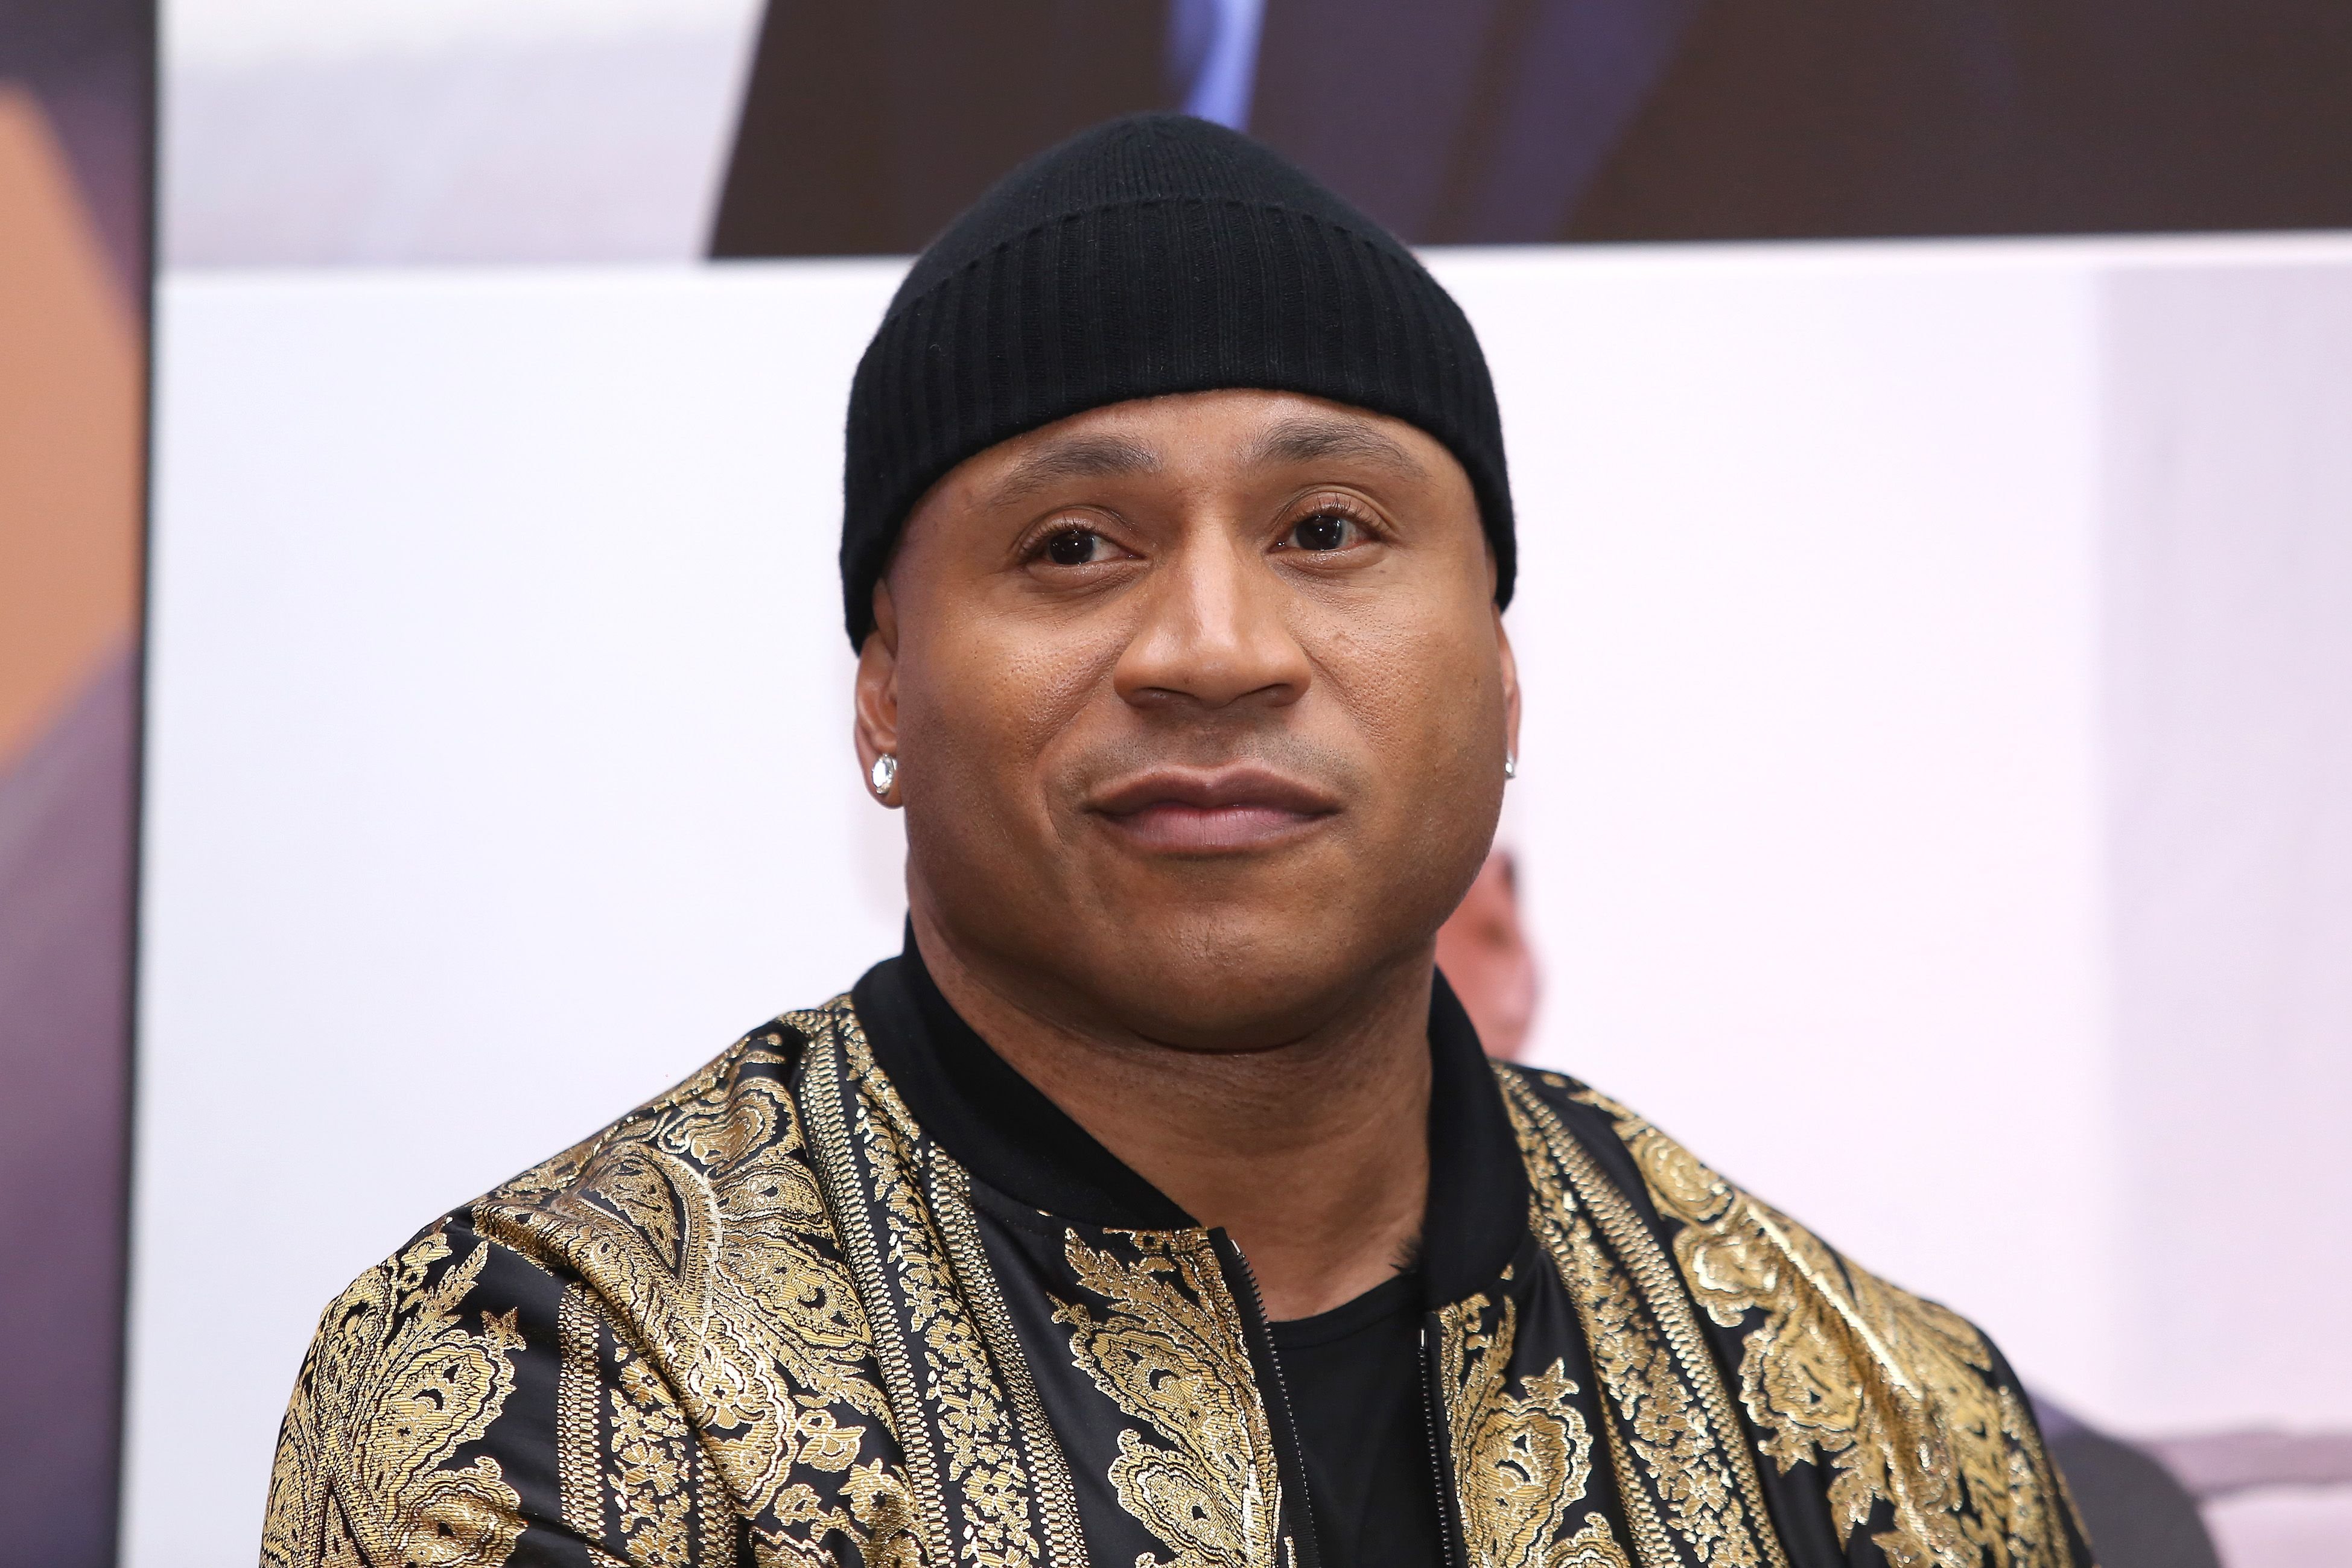 LL Cool J poses for photos during a press conference at Hotel St. Regis on June 5, 2019 in Mexico City, Mexico. | Photo: Getty Images